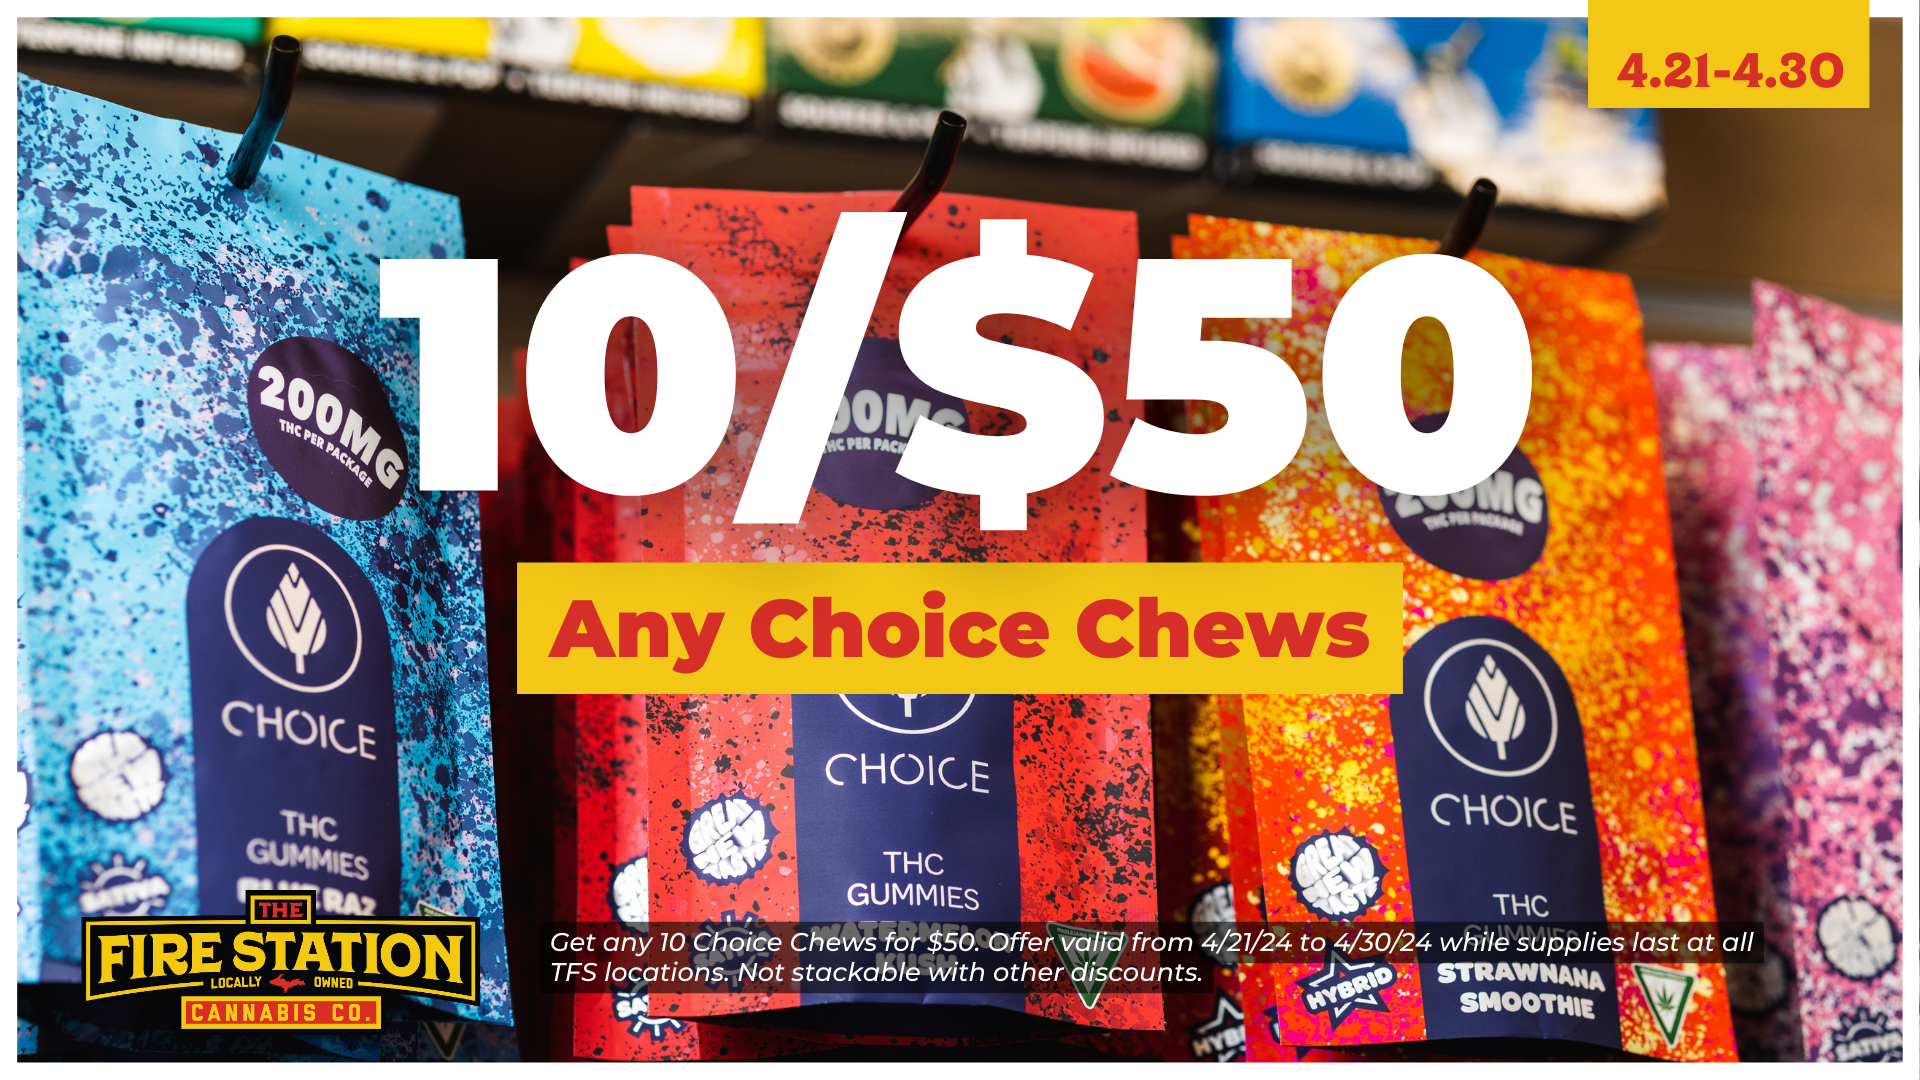 Get any 10 Choice Chews for $50. Offer valid from 4/21/24 to 4/30/24 while supplies last at all TFS locations. Not stackable with other discounts.